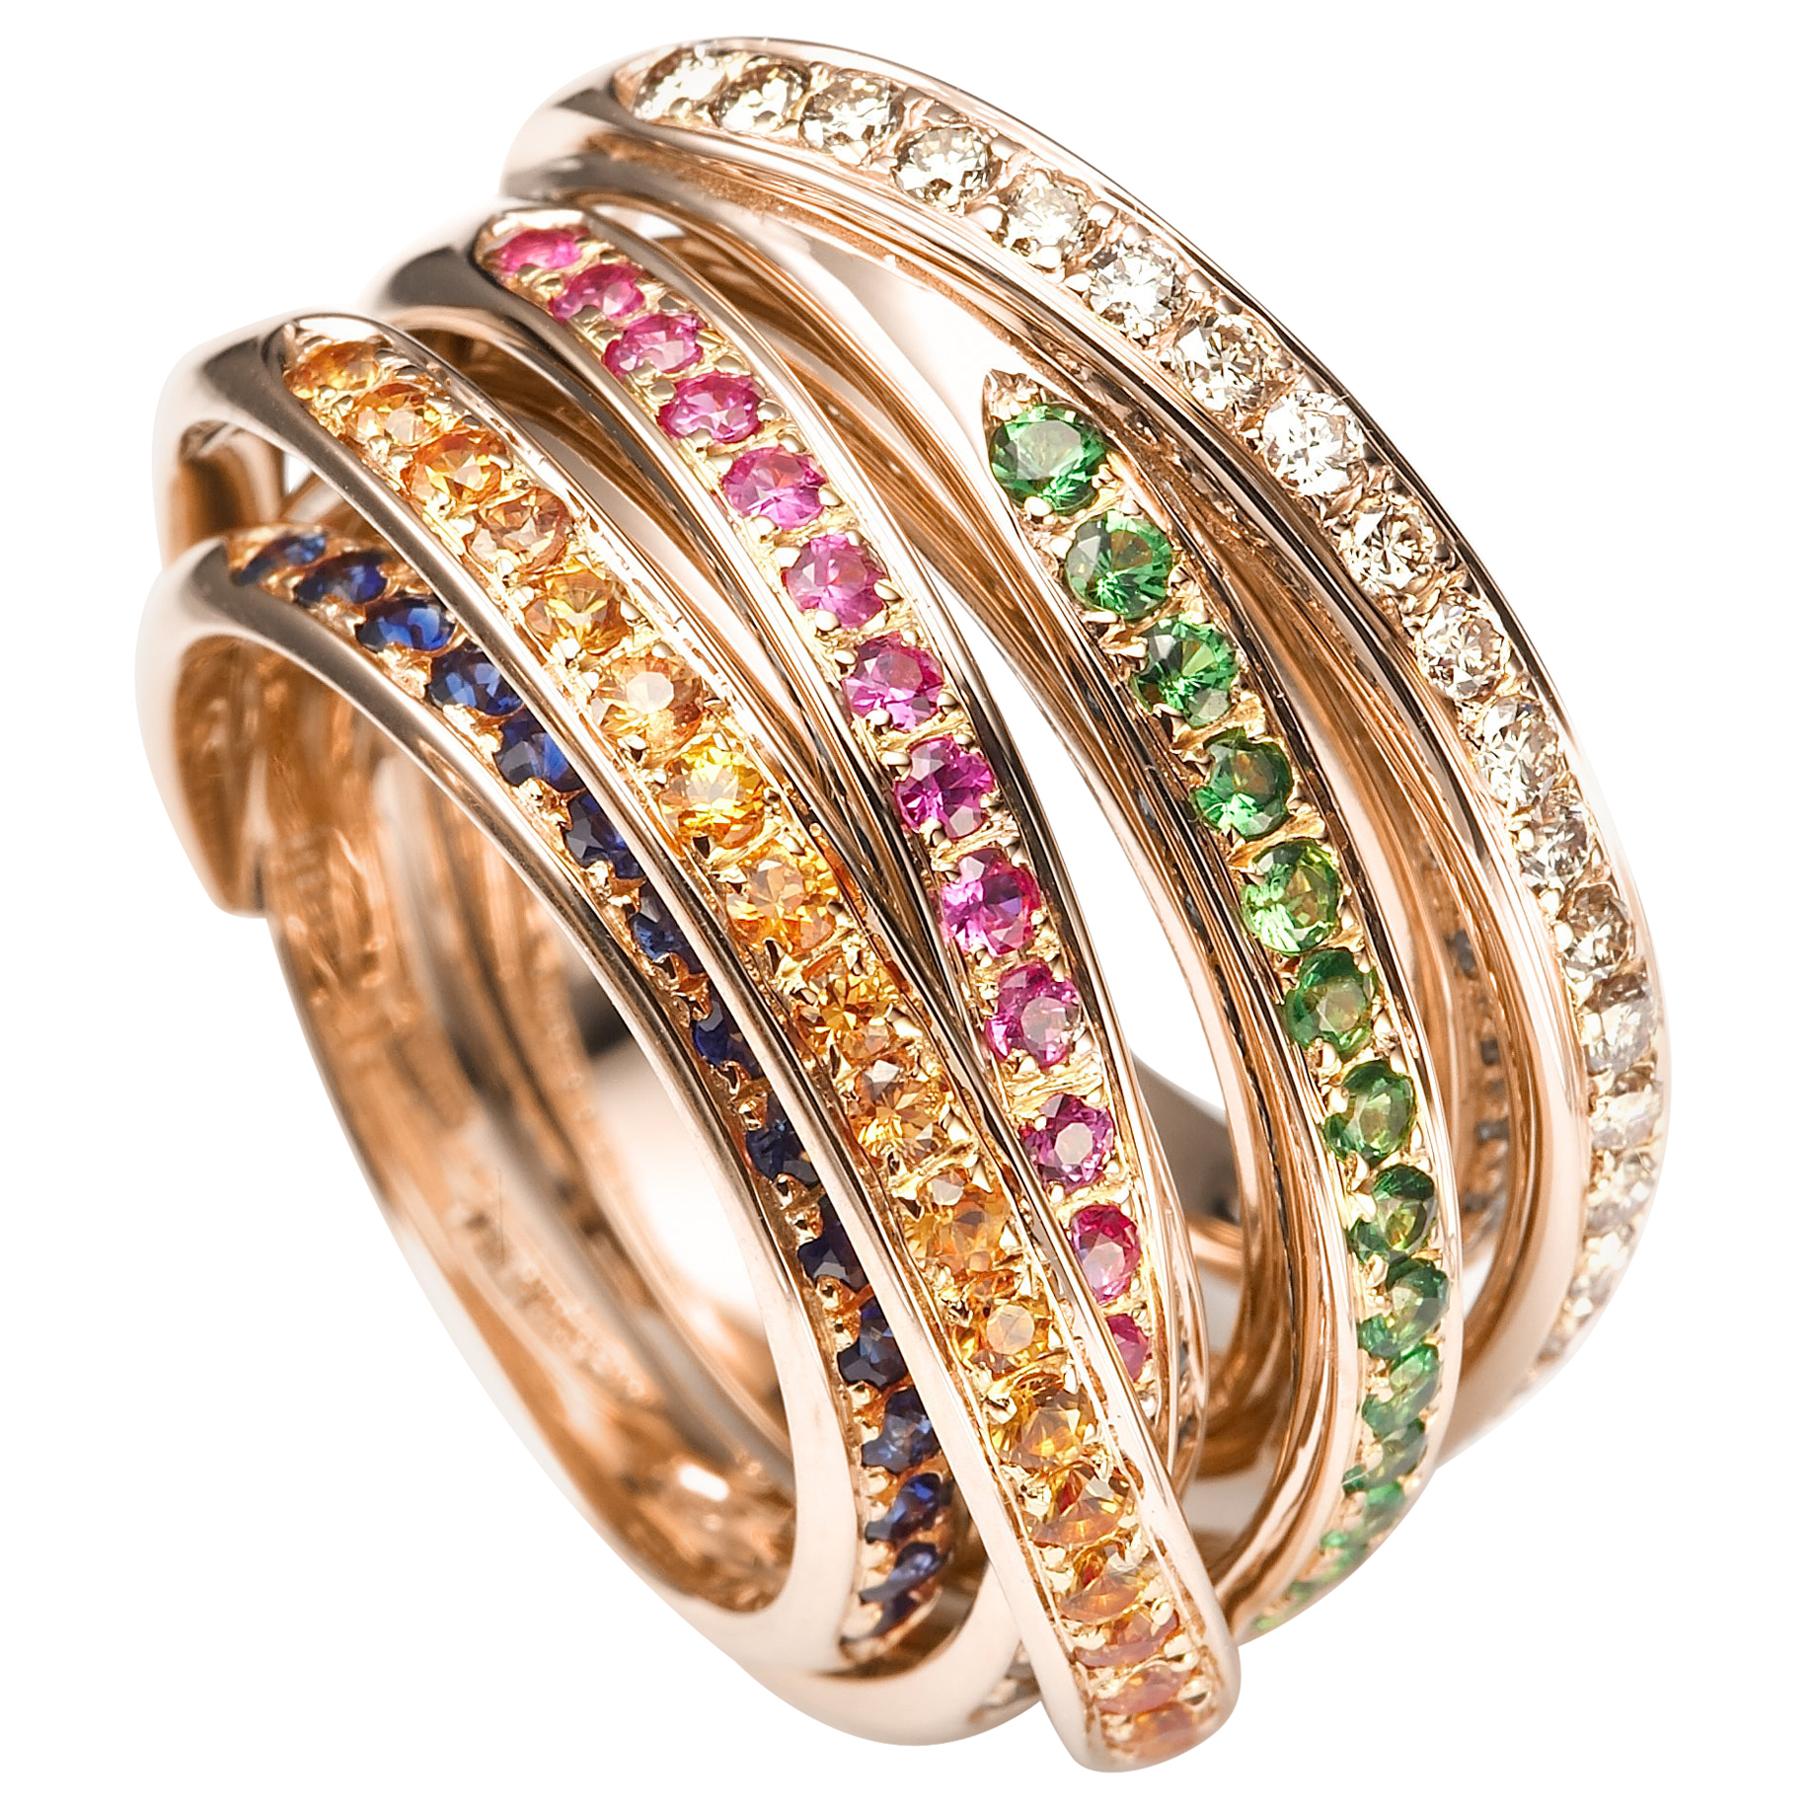 For Sale:  Mattioli Tibet Ring in Rose Gold and Brown Diamonds, Sapphires and Tsavorites